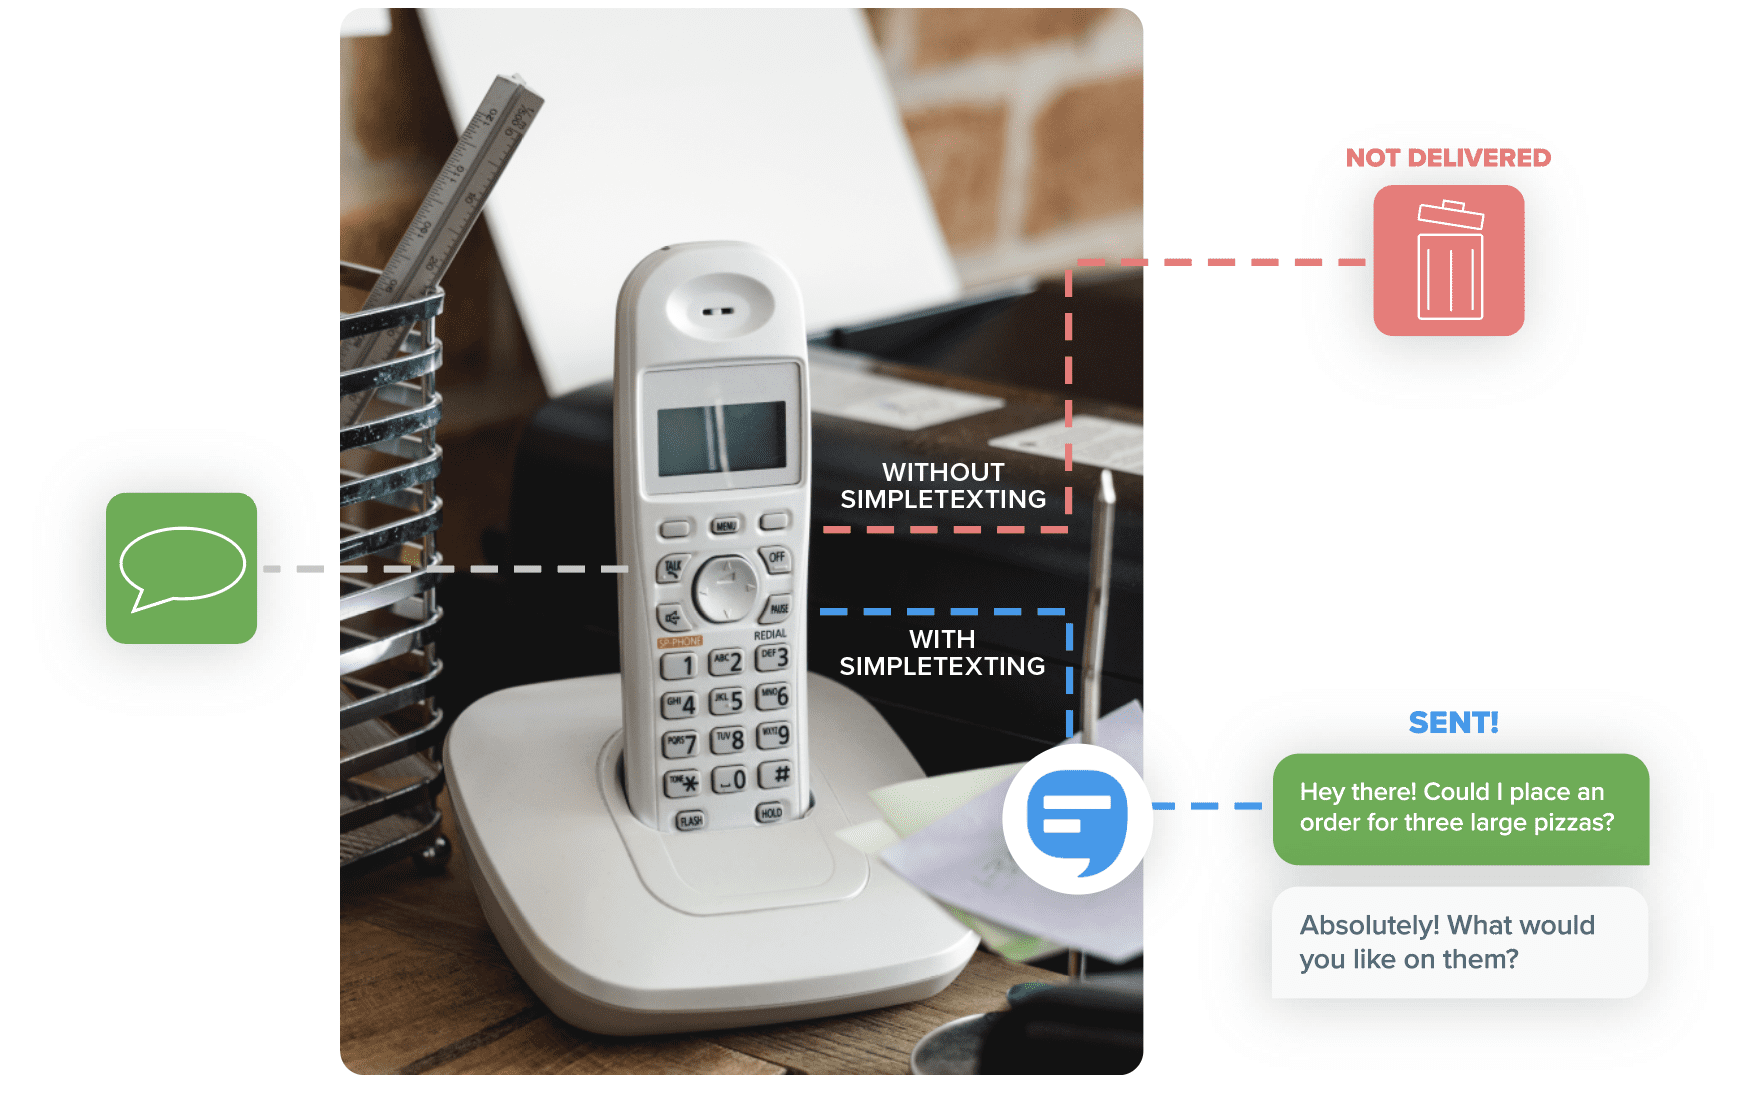 Landline Home Phone Service in Your Area